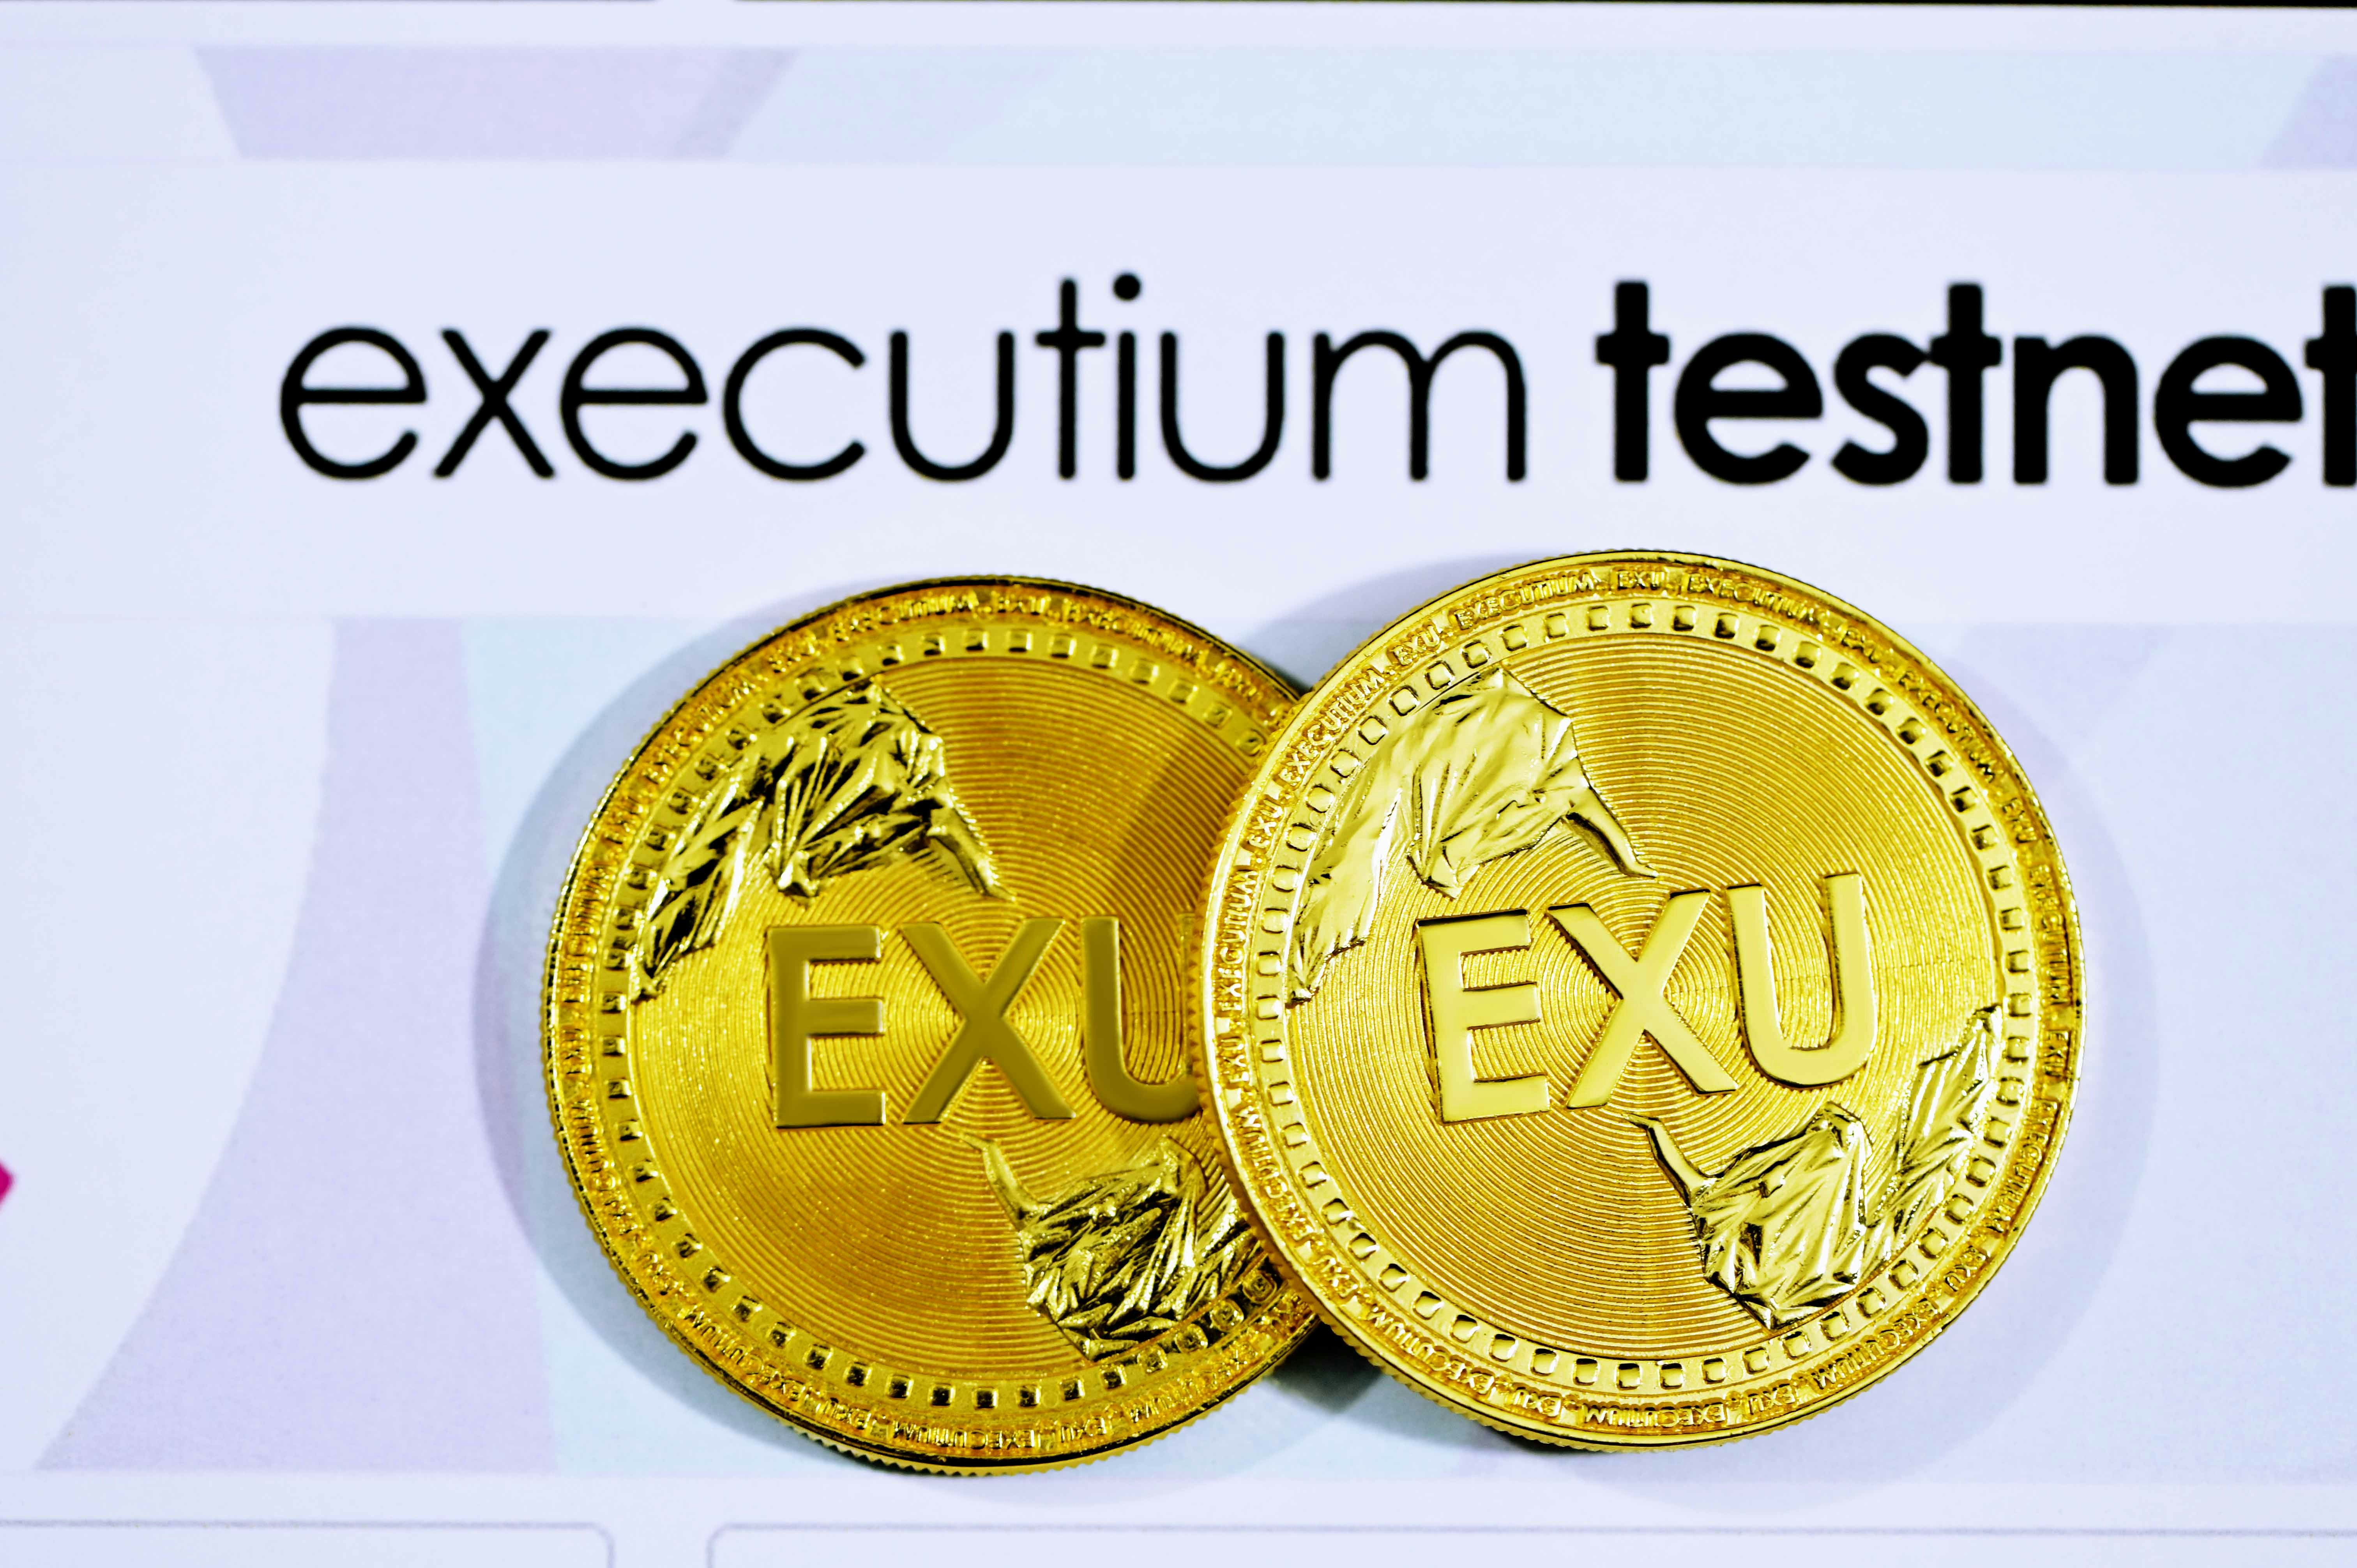 Two Executium coins on top of the Executium testnet page